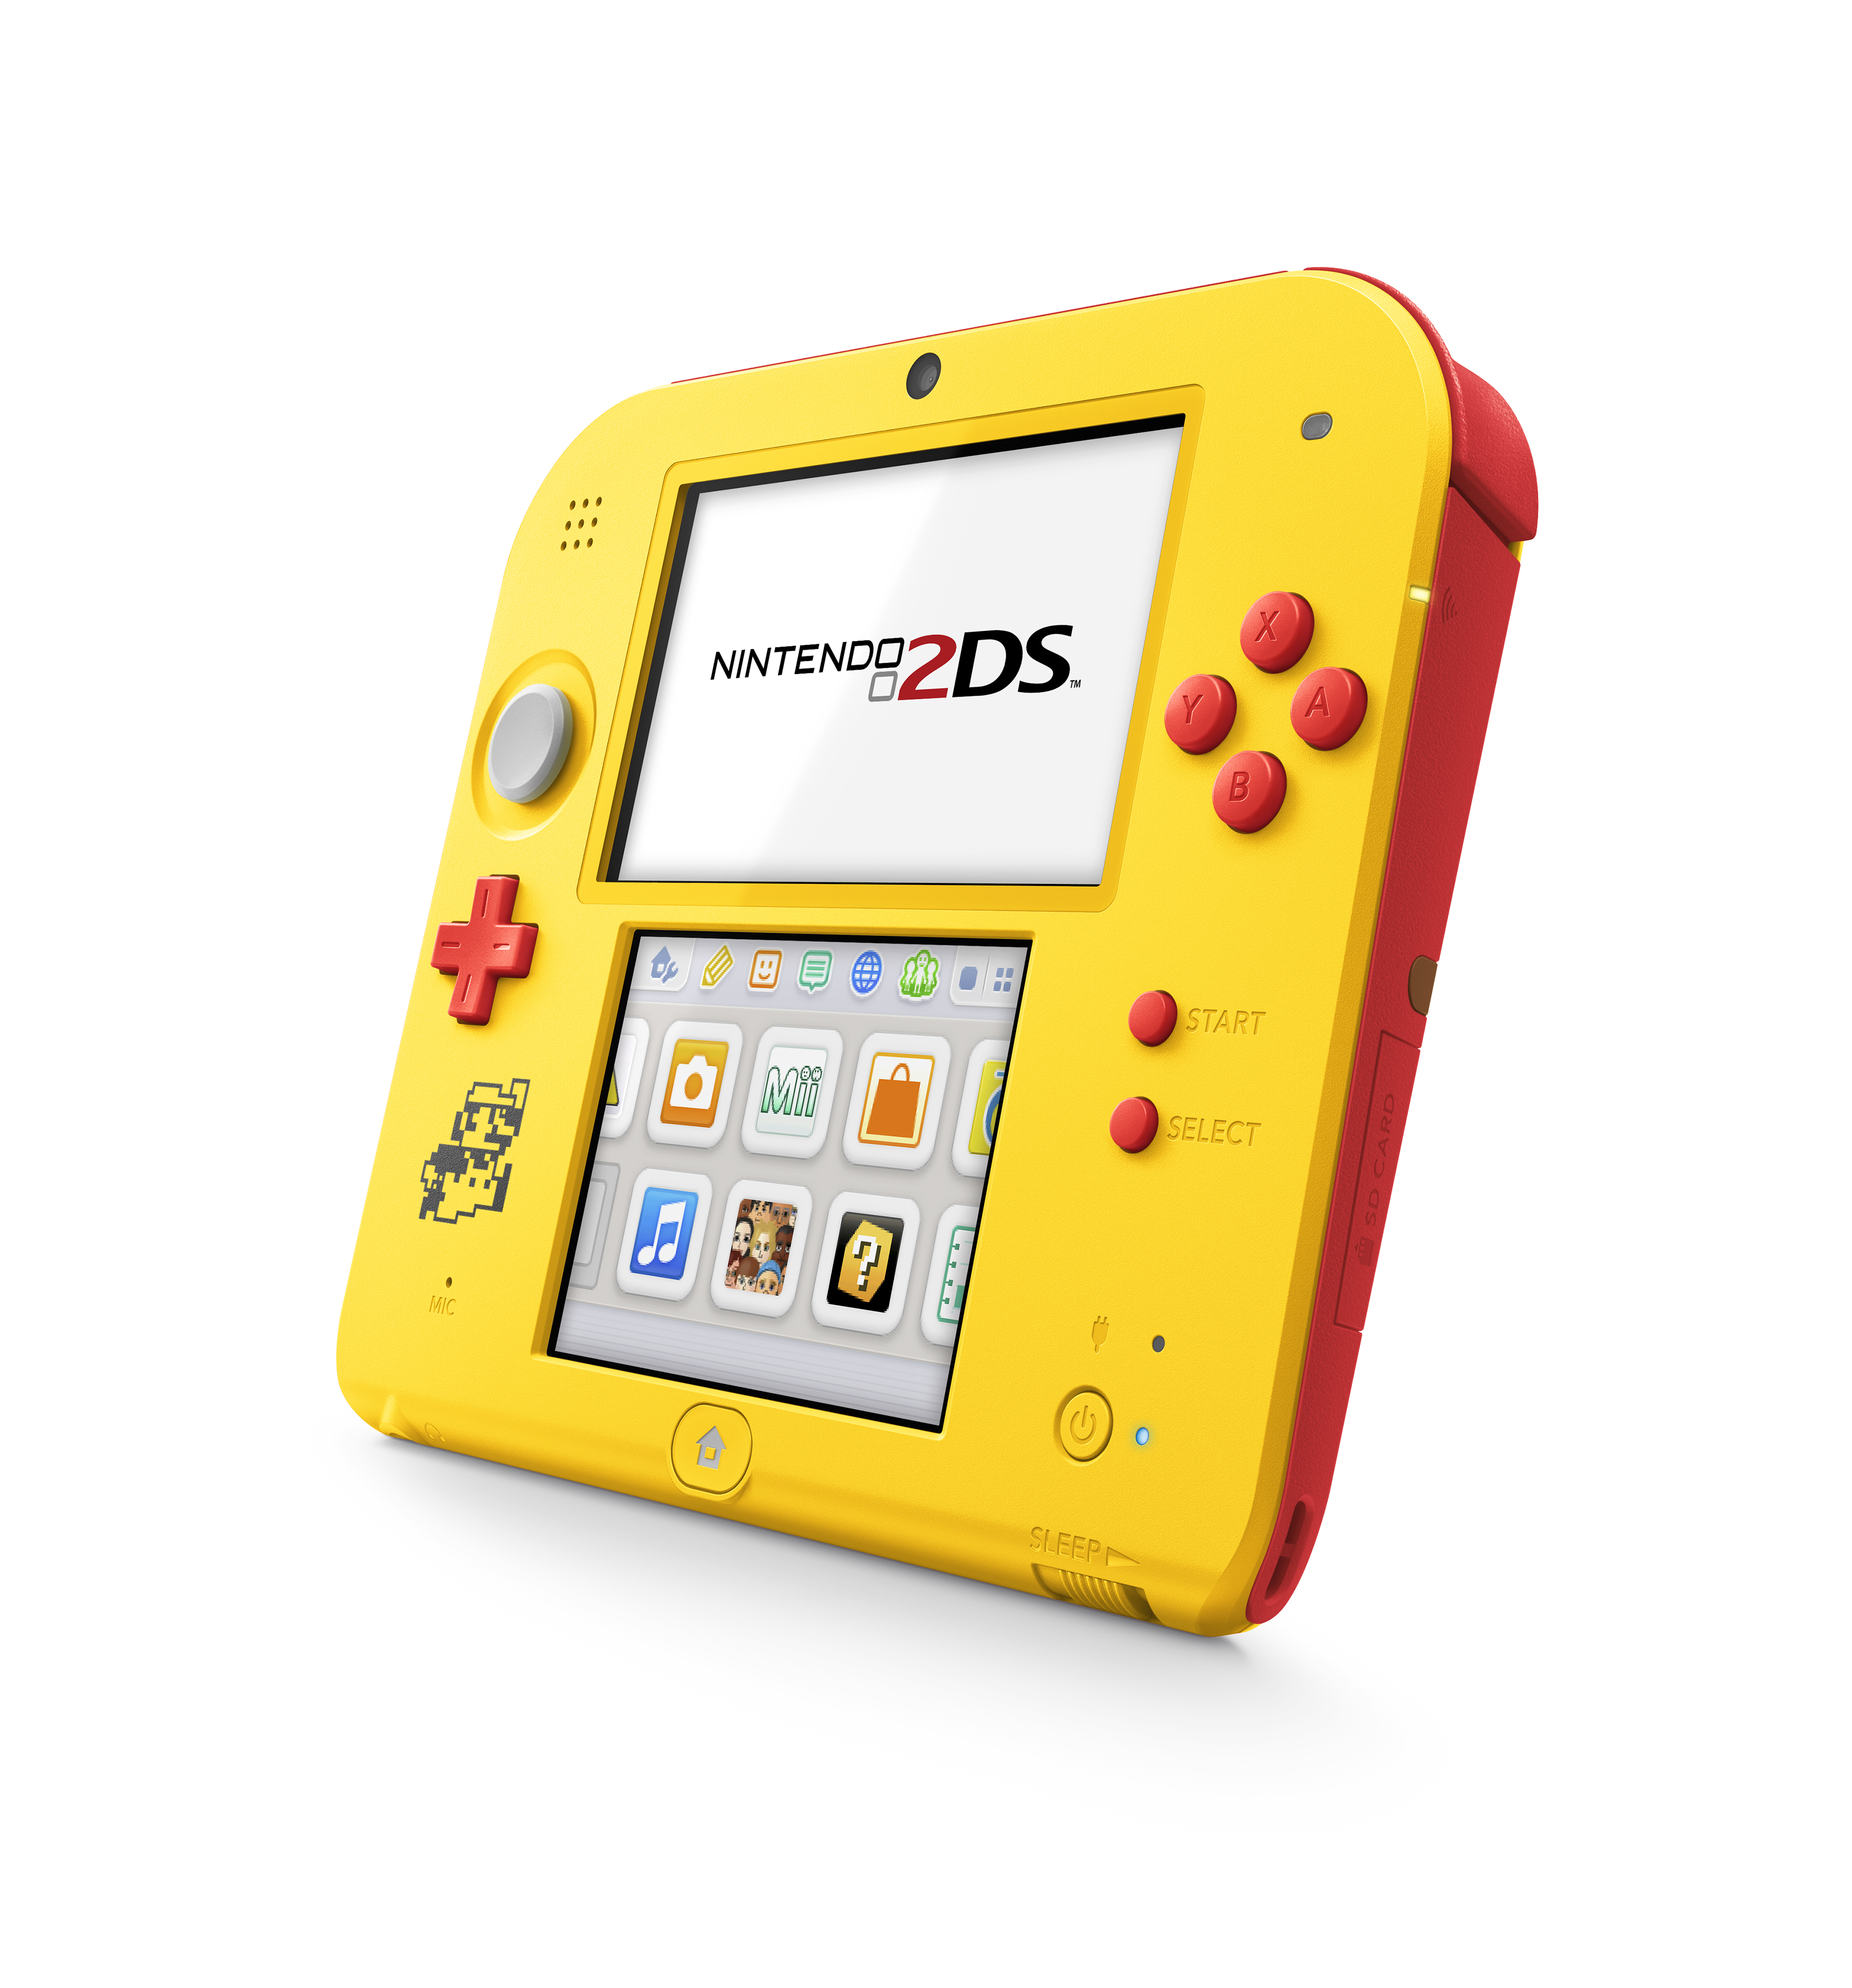 Nintendo 2DS System with Super Mario Maker (Pre-Installed), Yellow / Red, FTRSYBDW - image 4 of 7